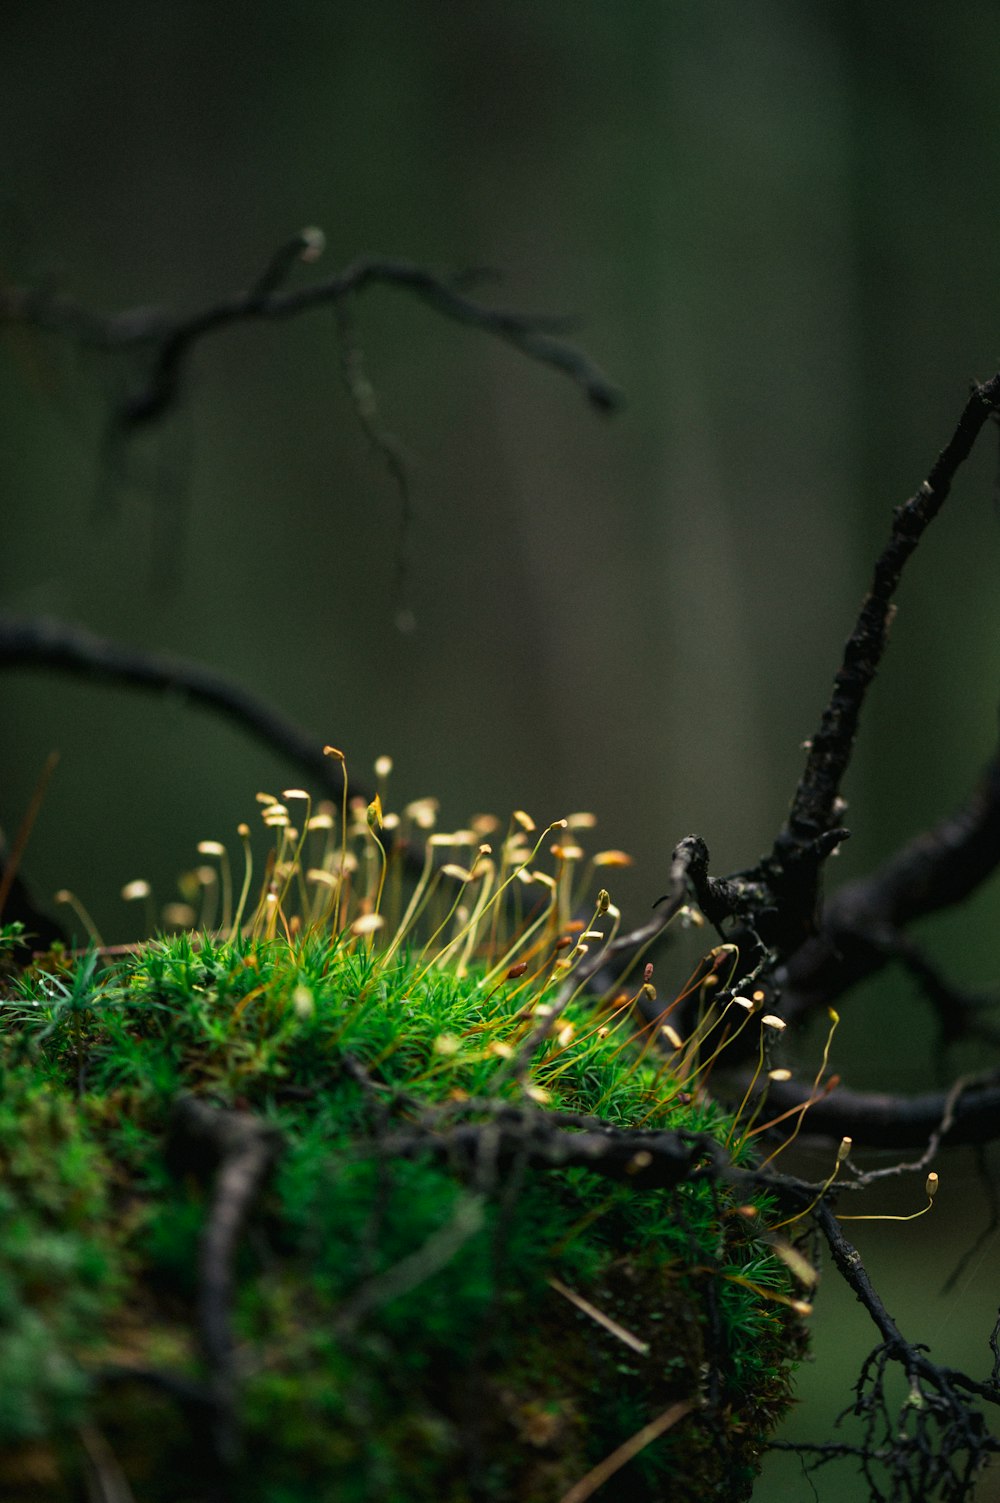 moss growing on a tree branch in the forest